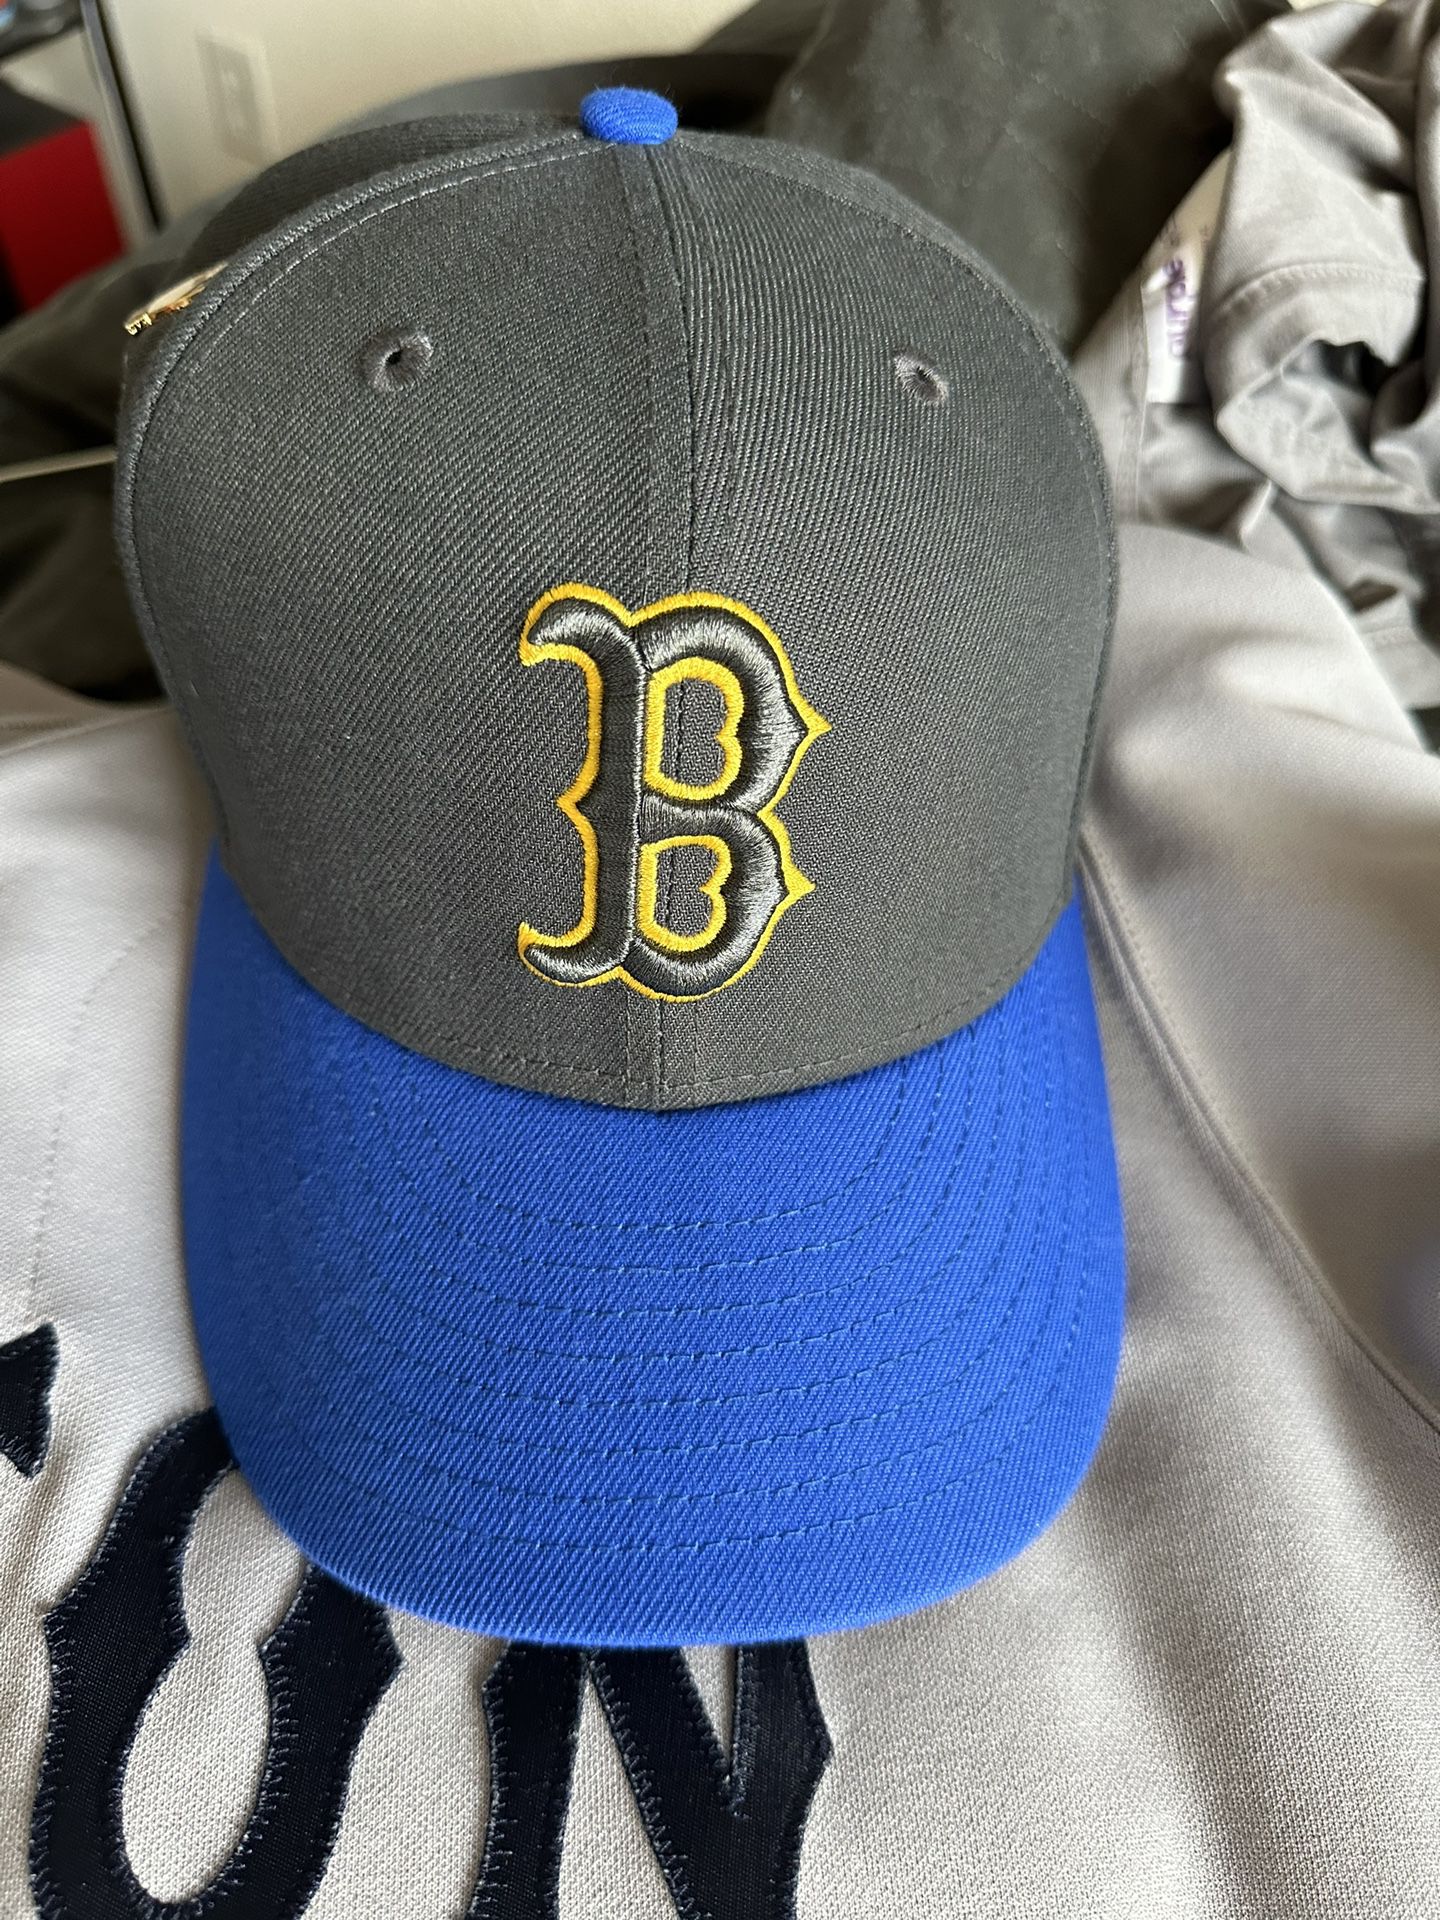 boston red sox hat blue and yellow